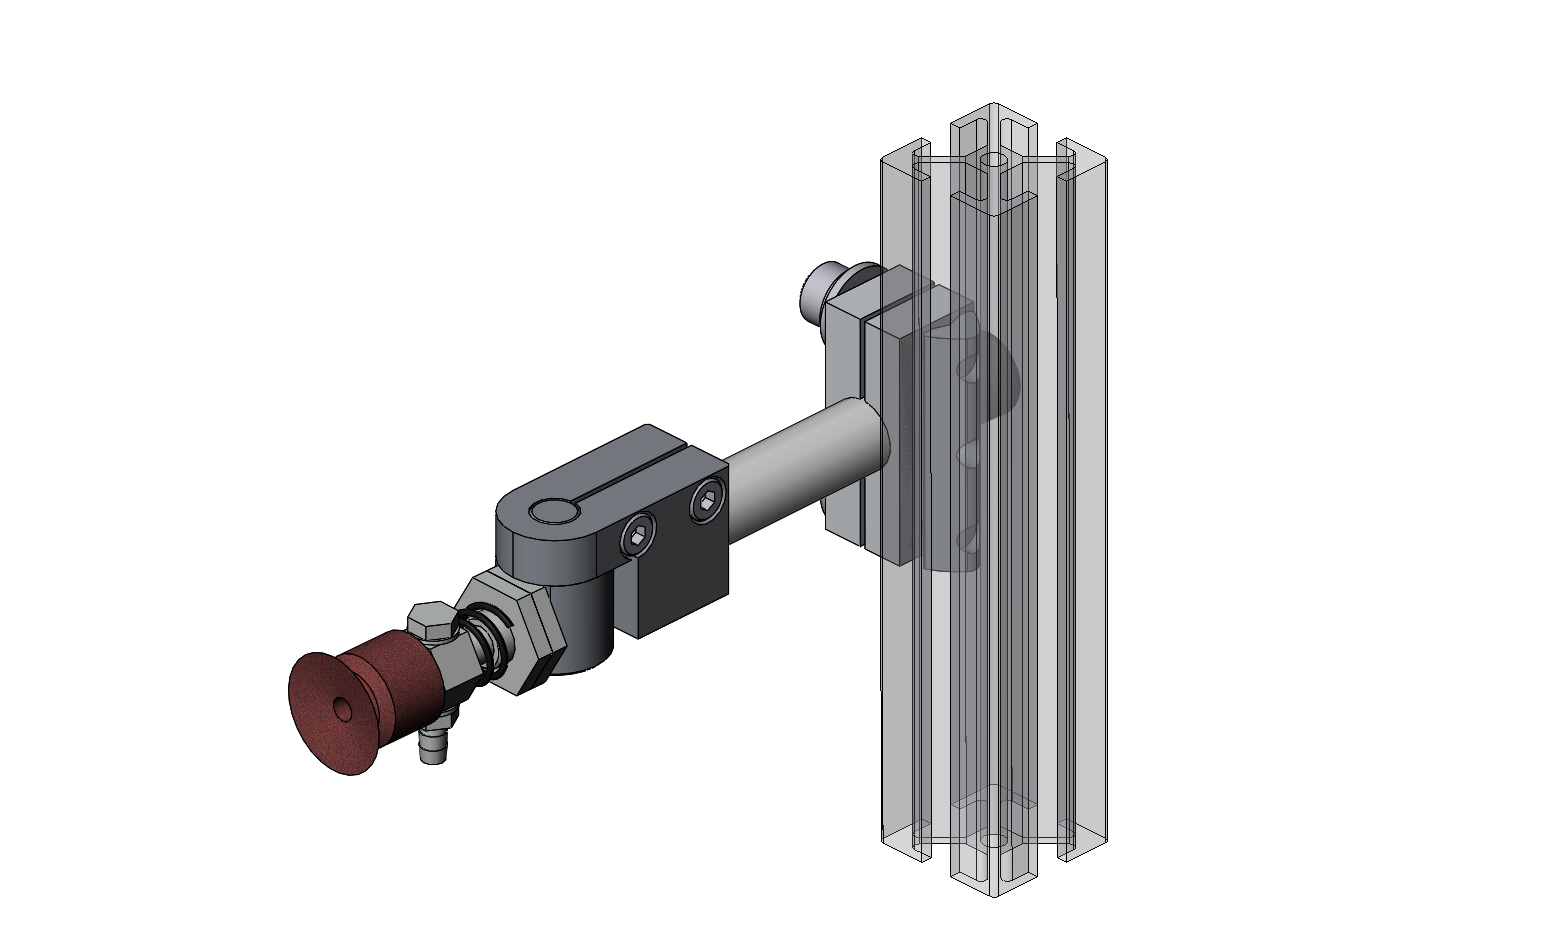 SUCTION MODULE FOR LET'S JOINT